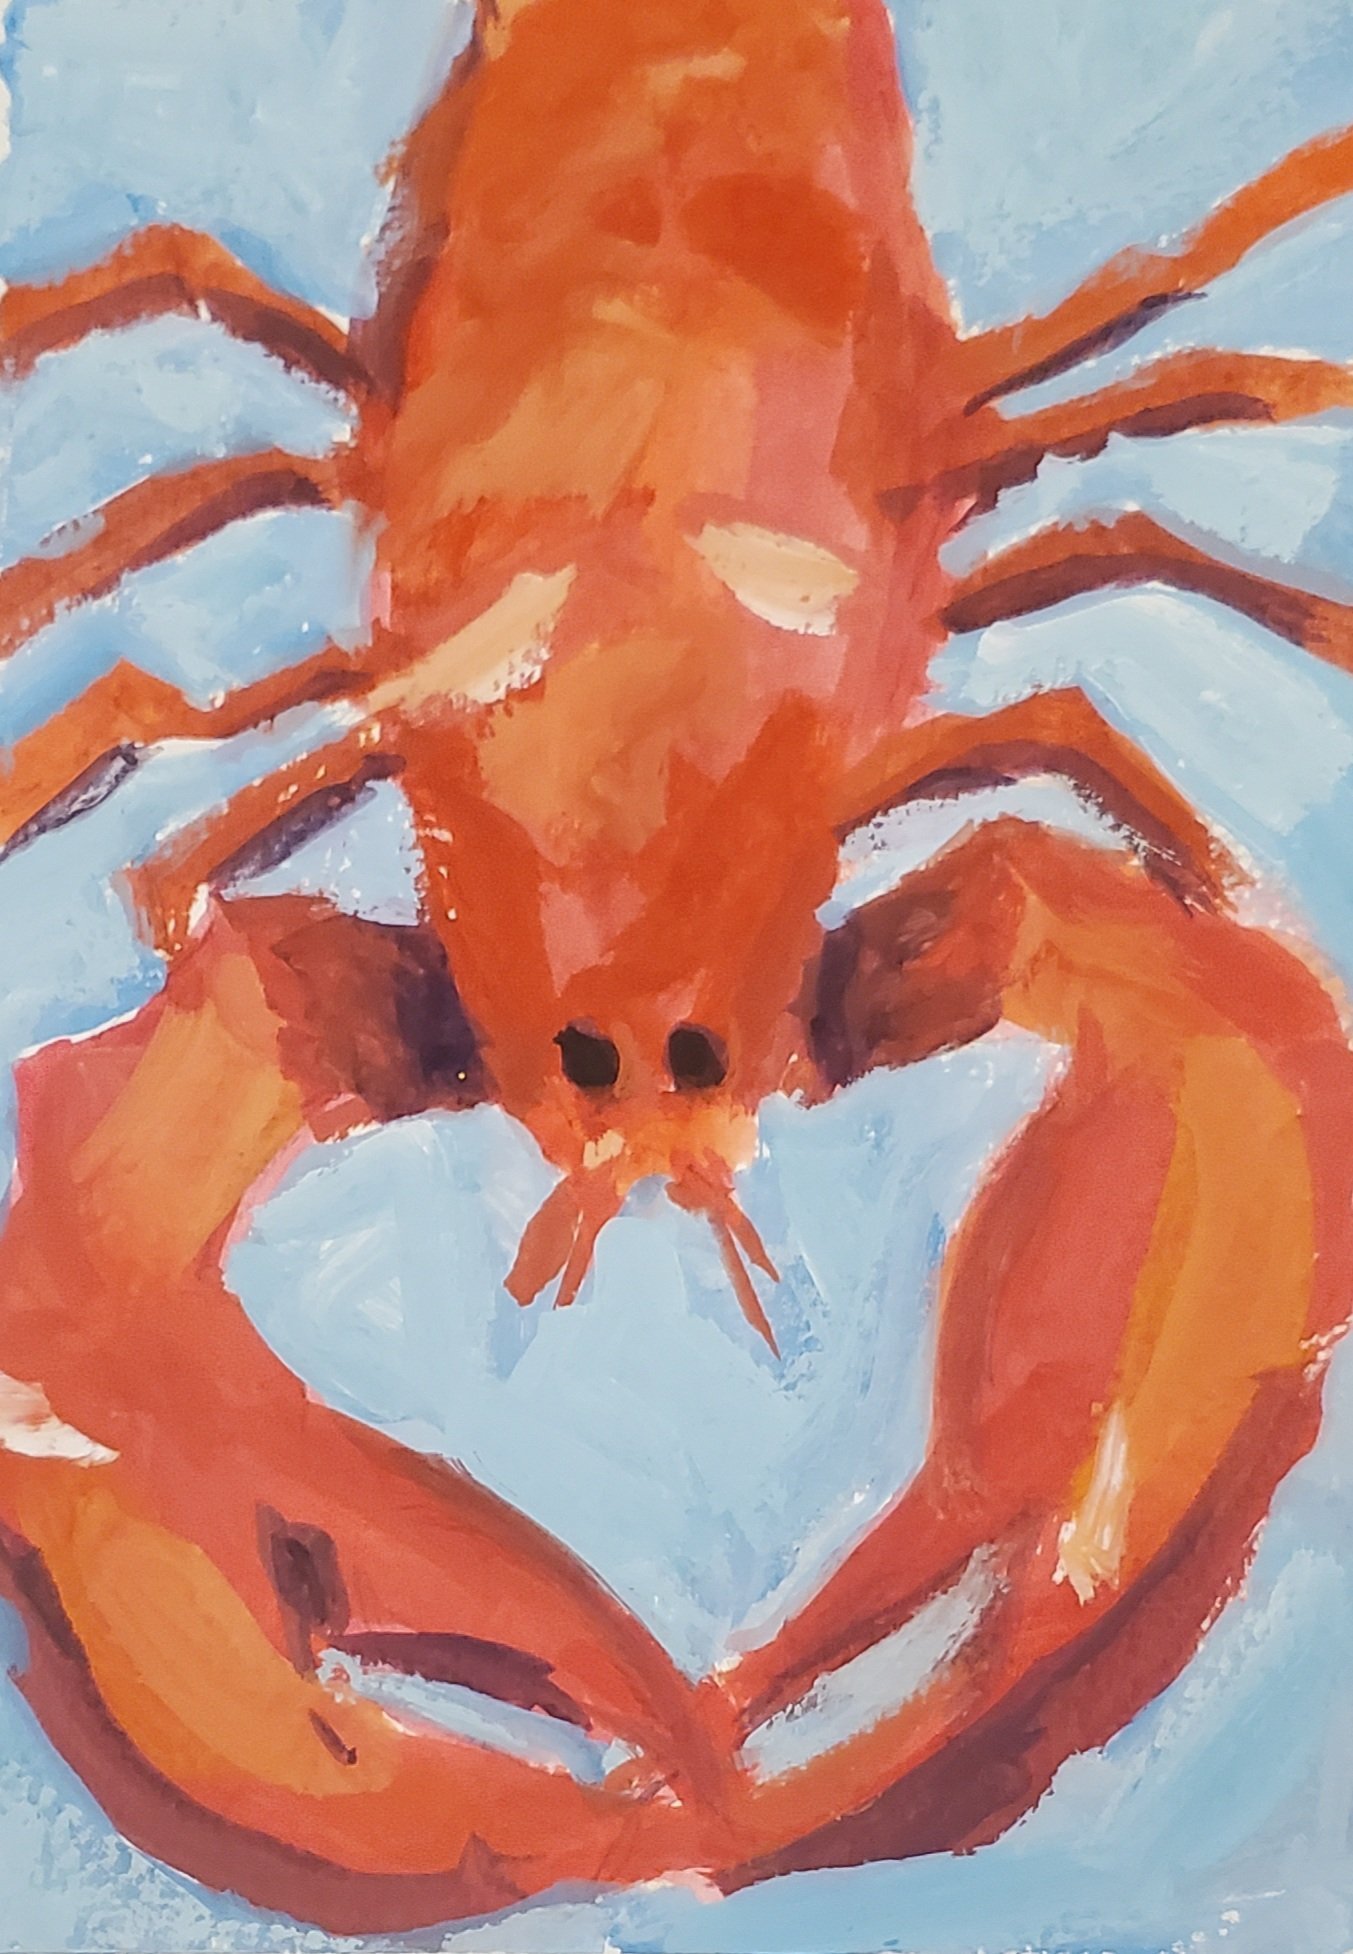 Red Lobster, 6"x8", Guache